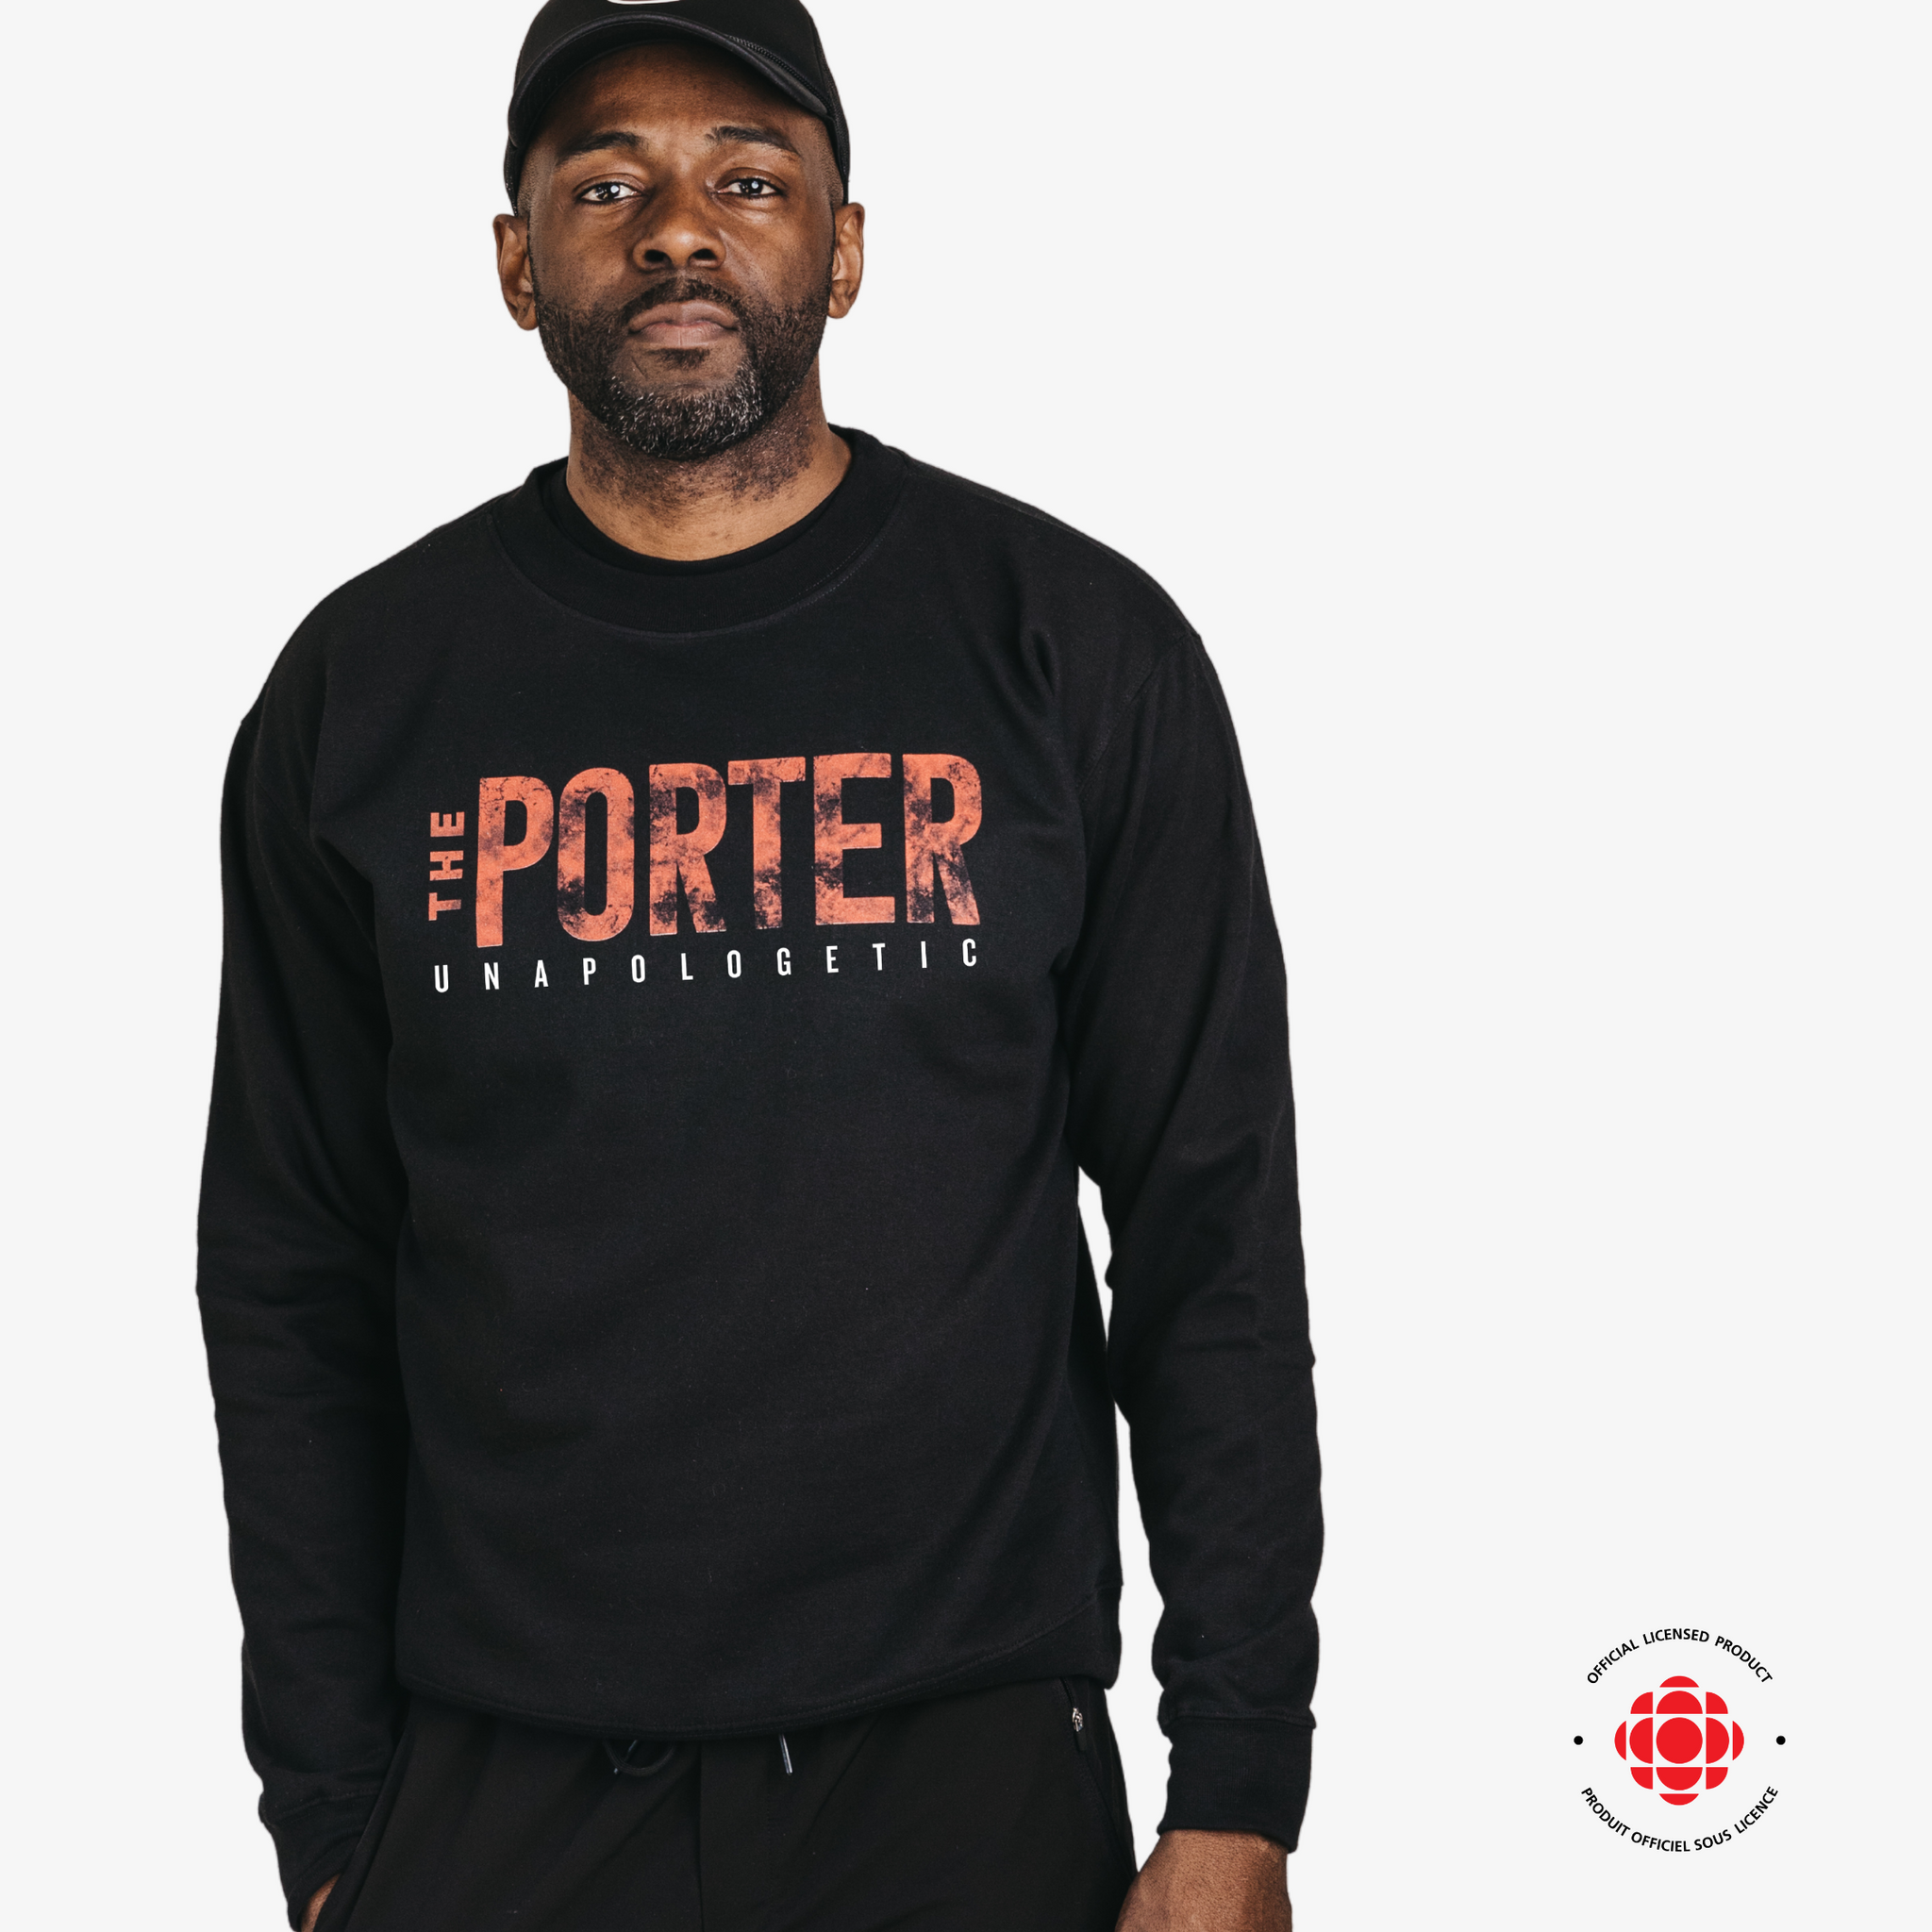 Zueike Porter Unapologetic Midweight Crew